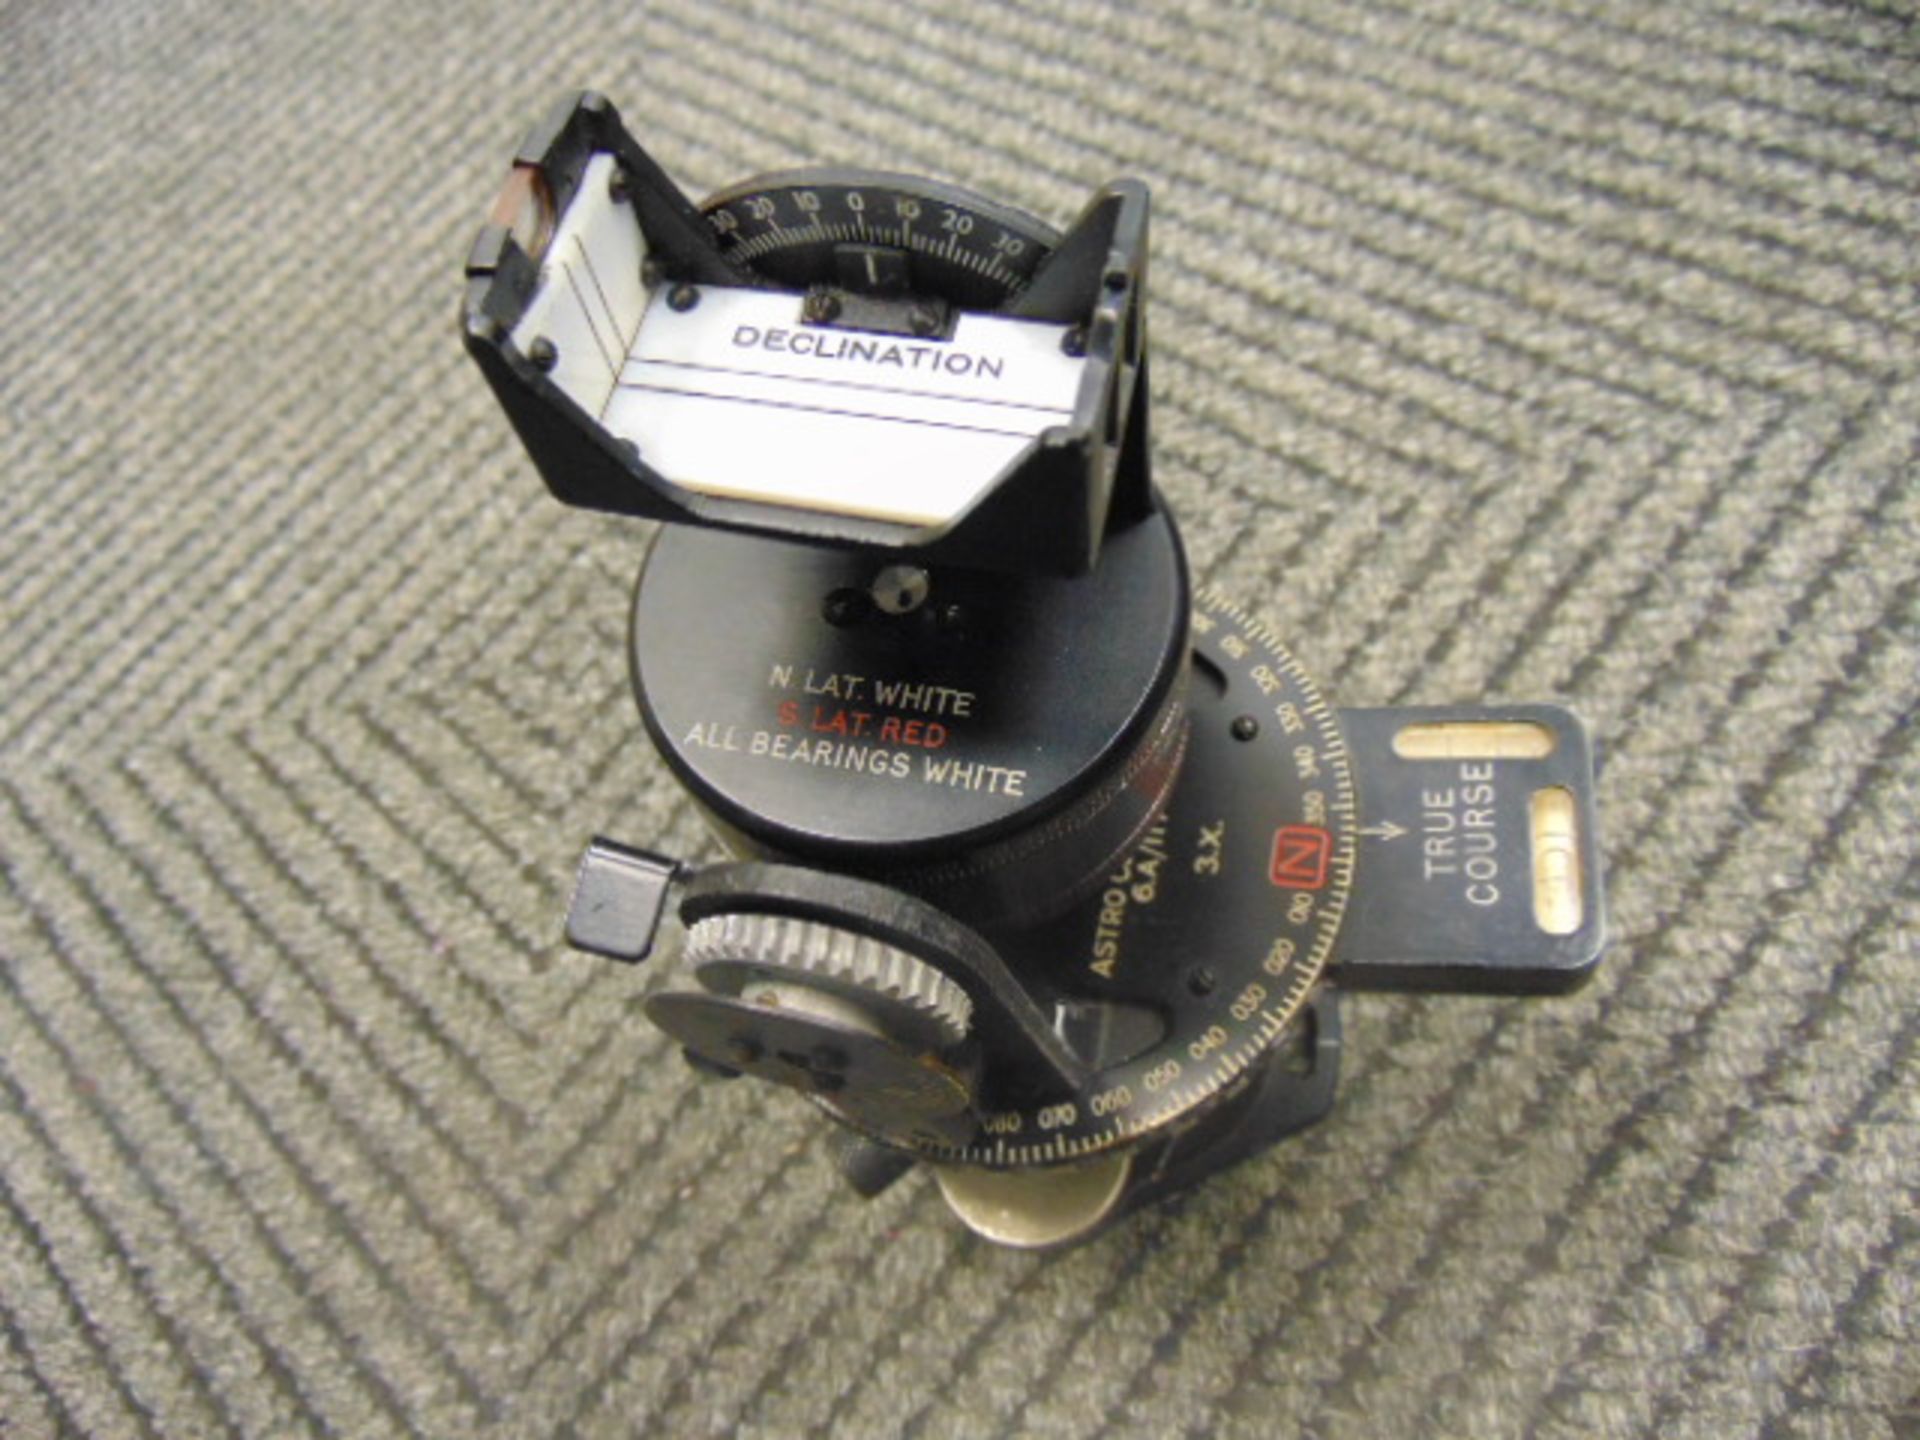 Very Rare Air Ministry Astro Mk 2 Compass with Original Case - Image 2 of 8